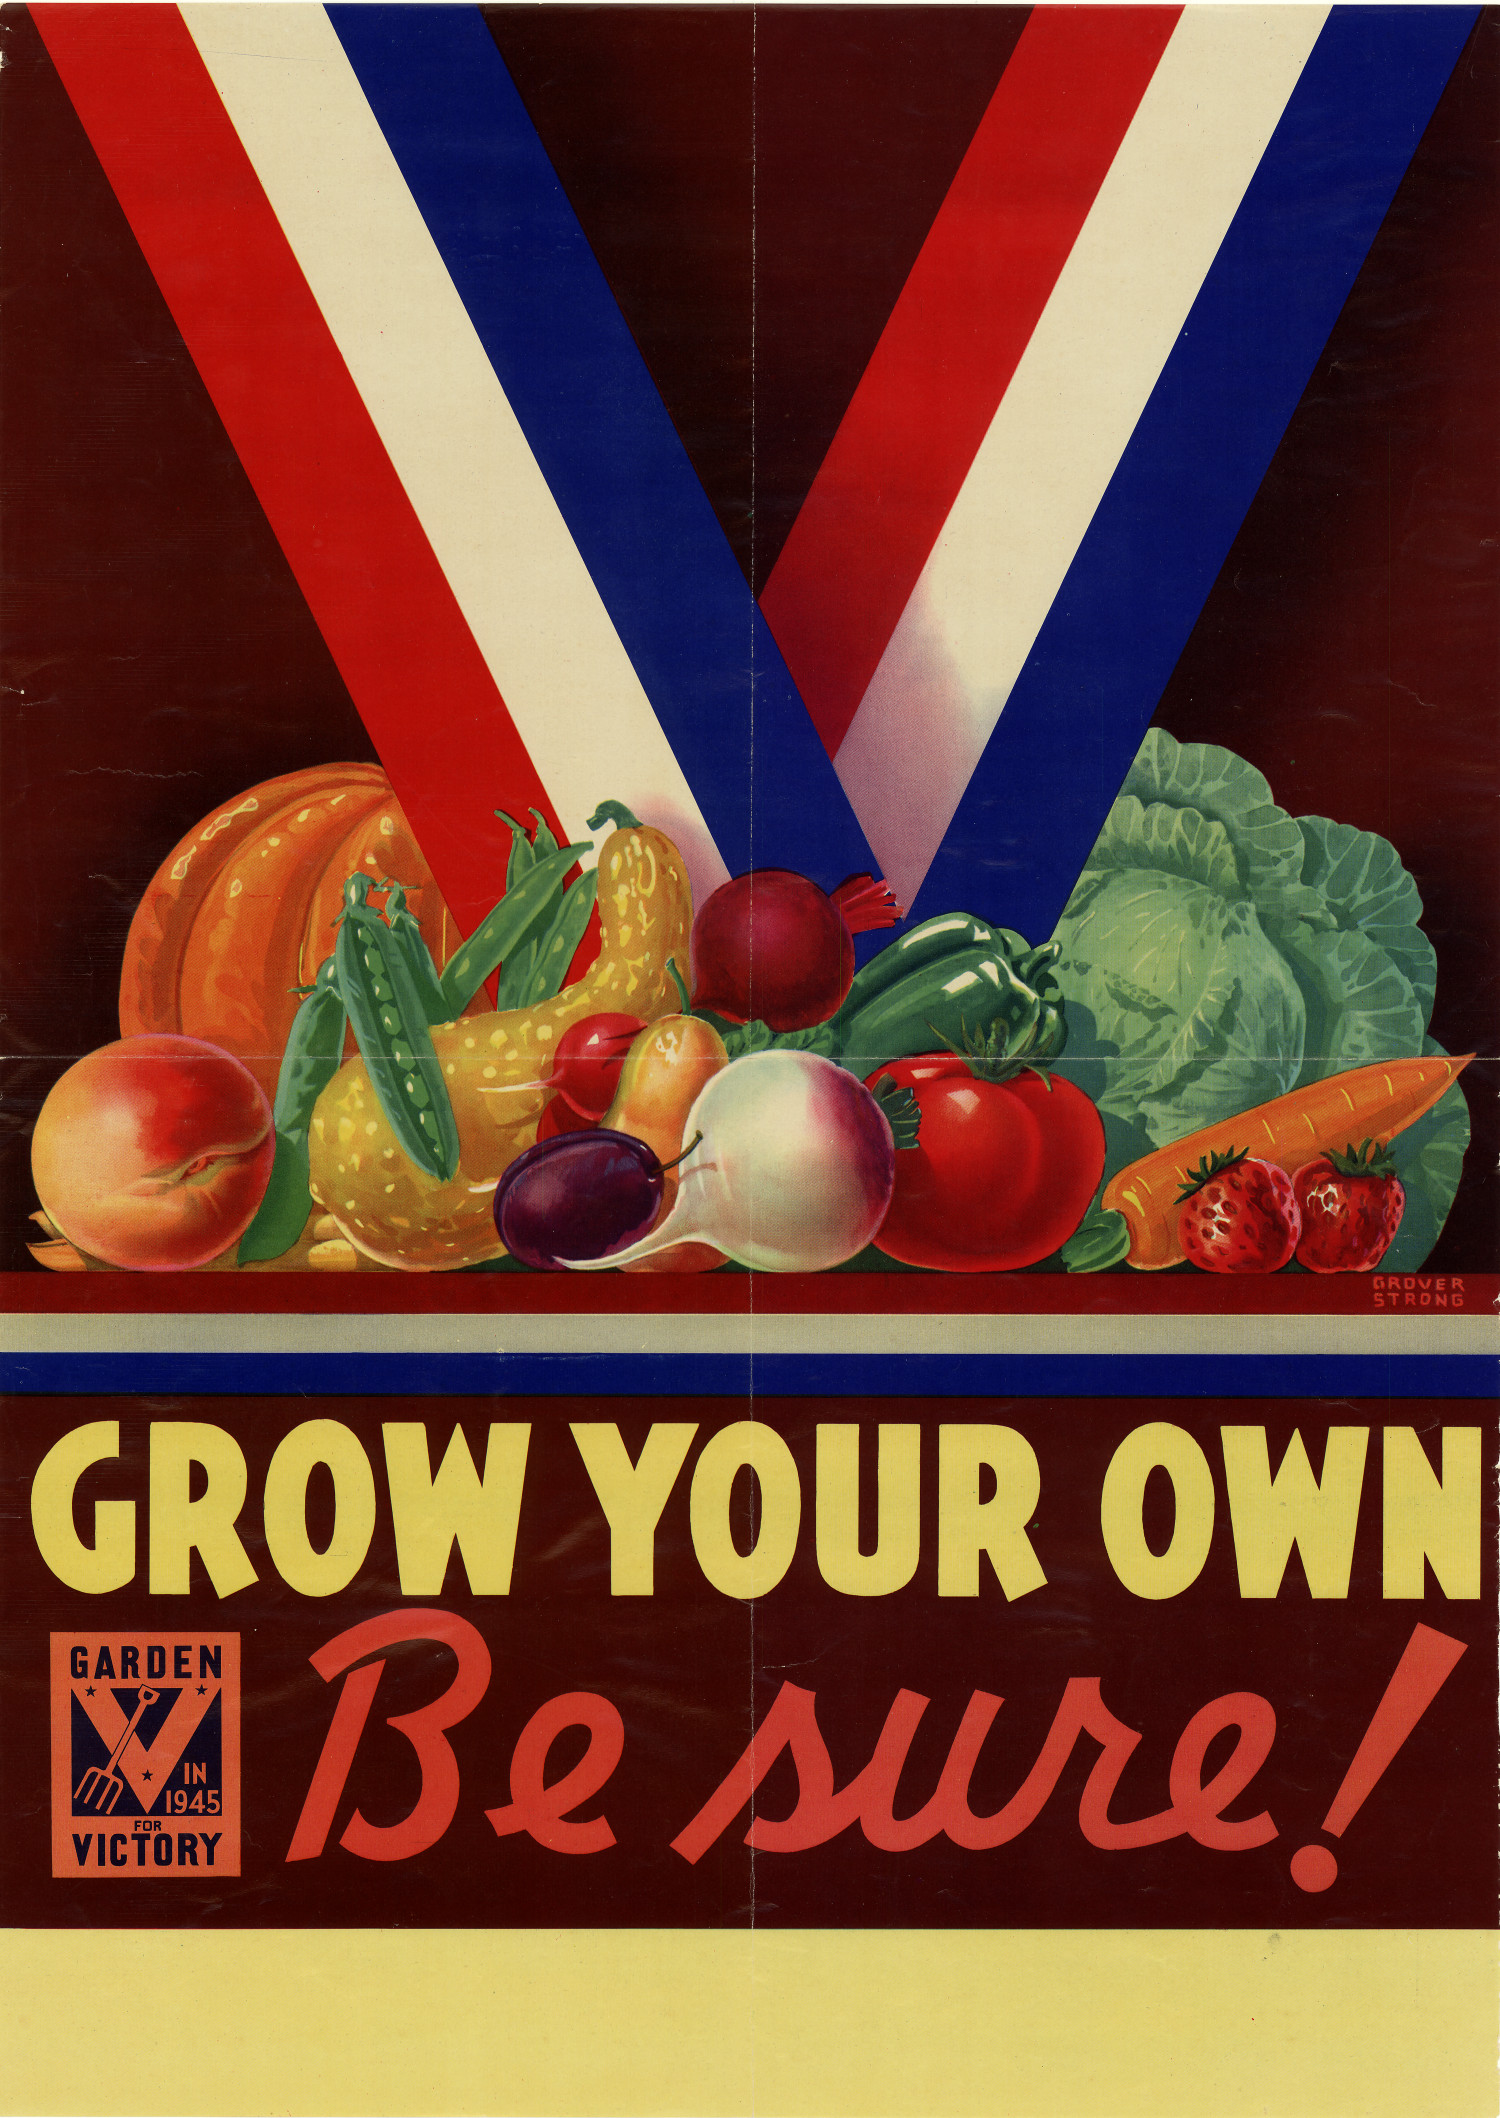 Grow your own : be sure! - UNT Digital Library